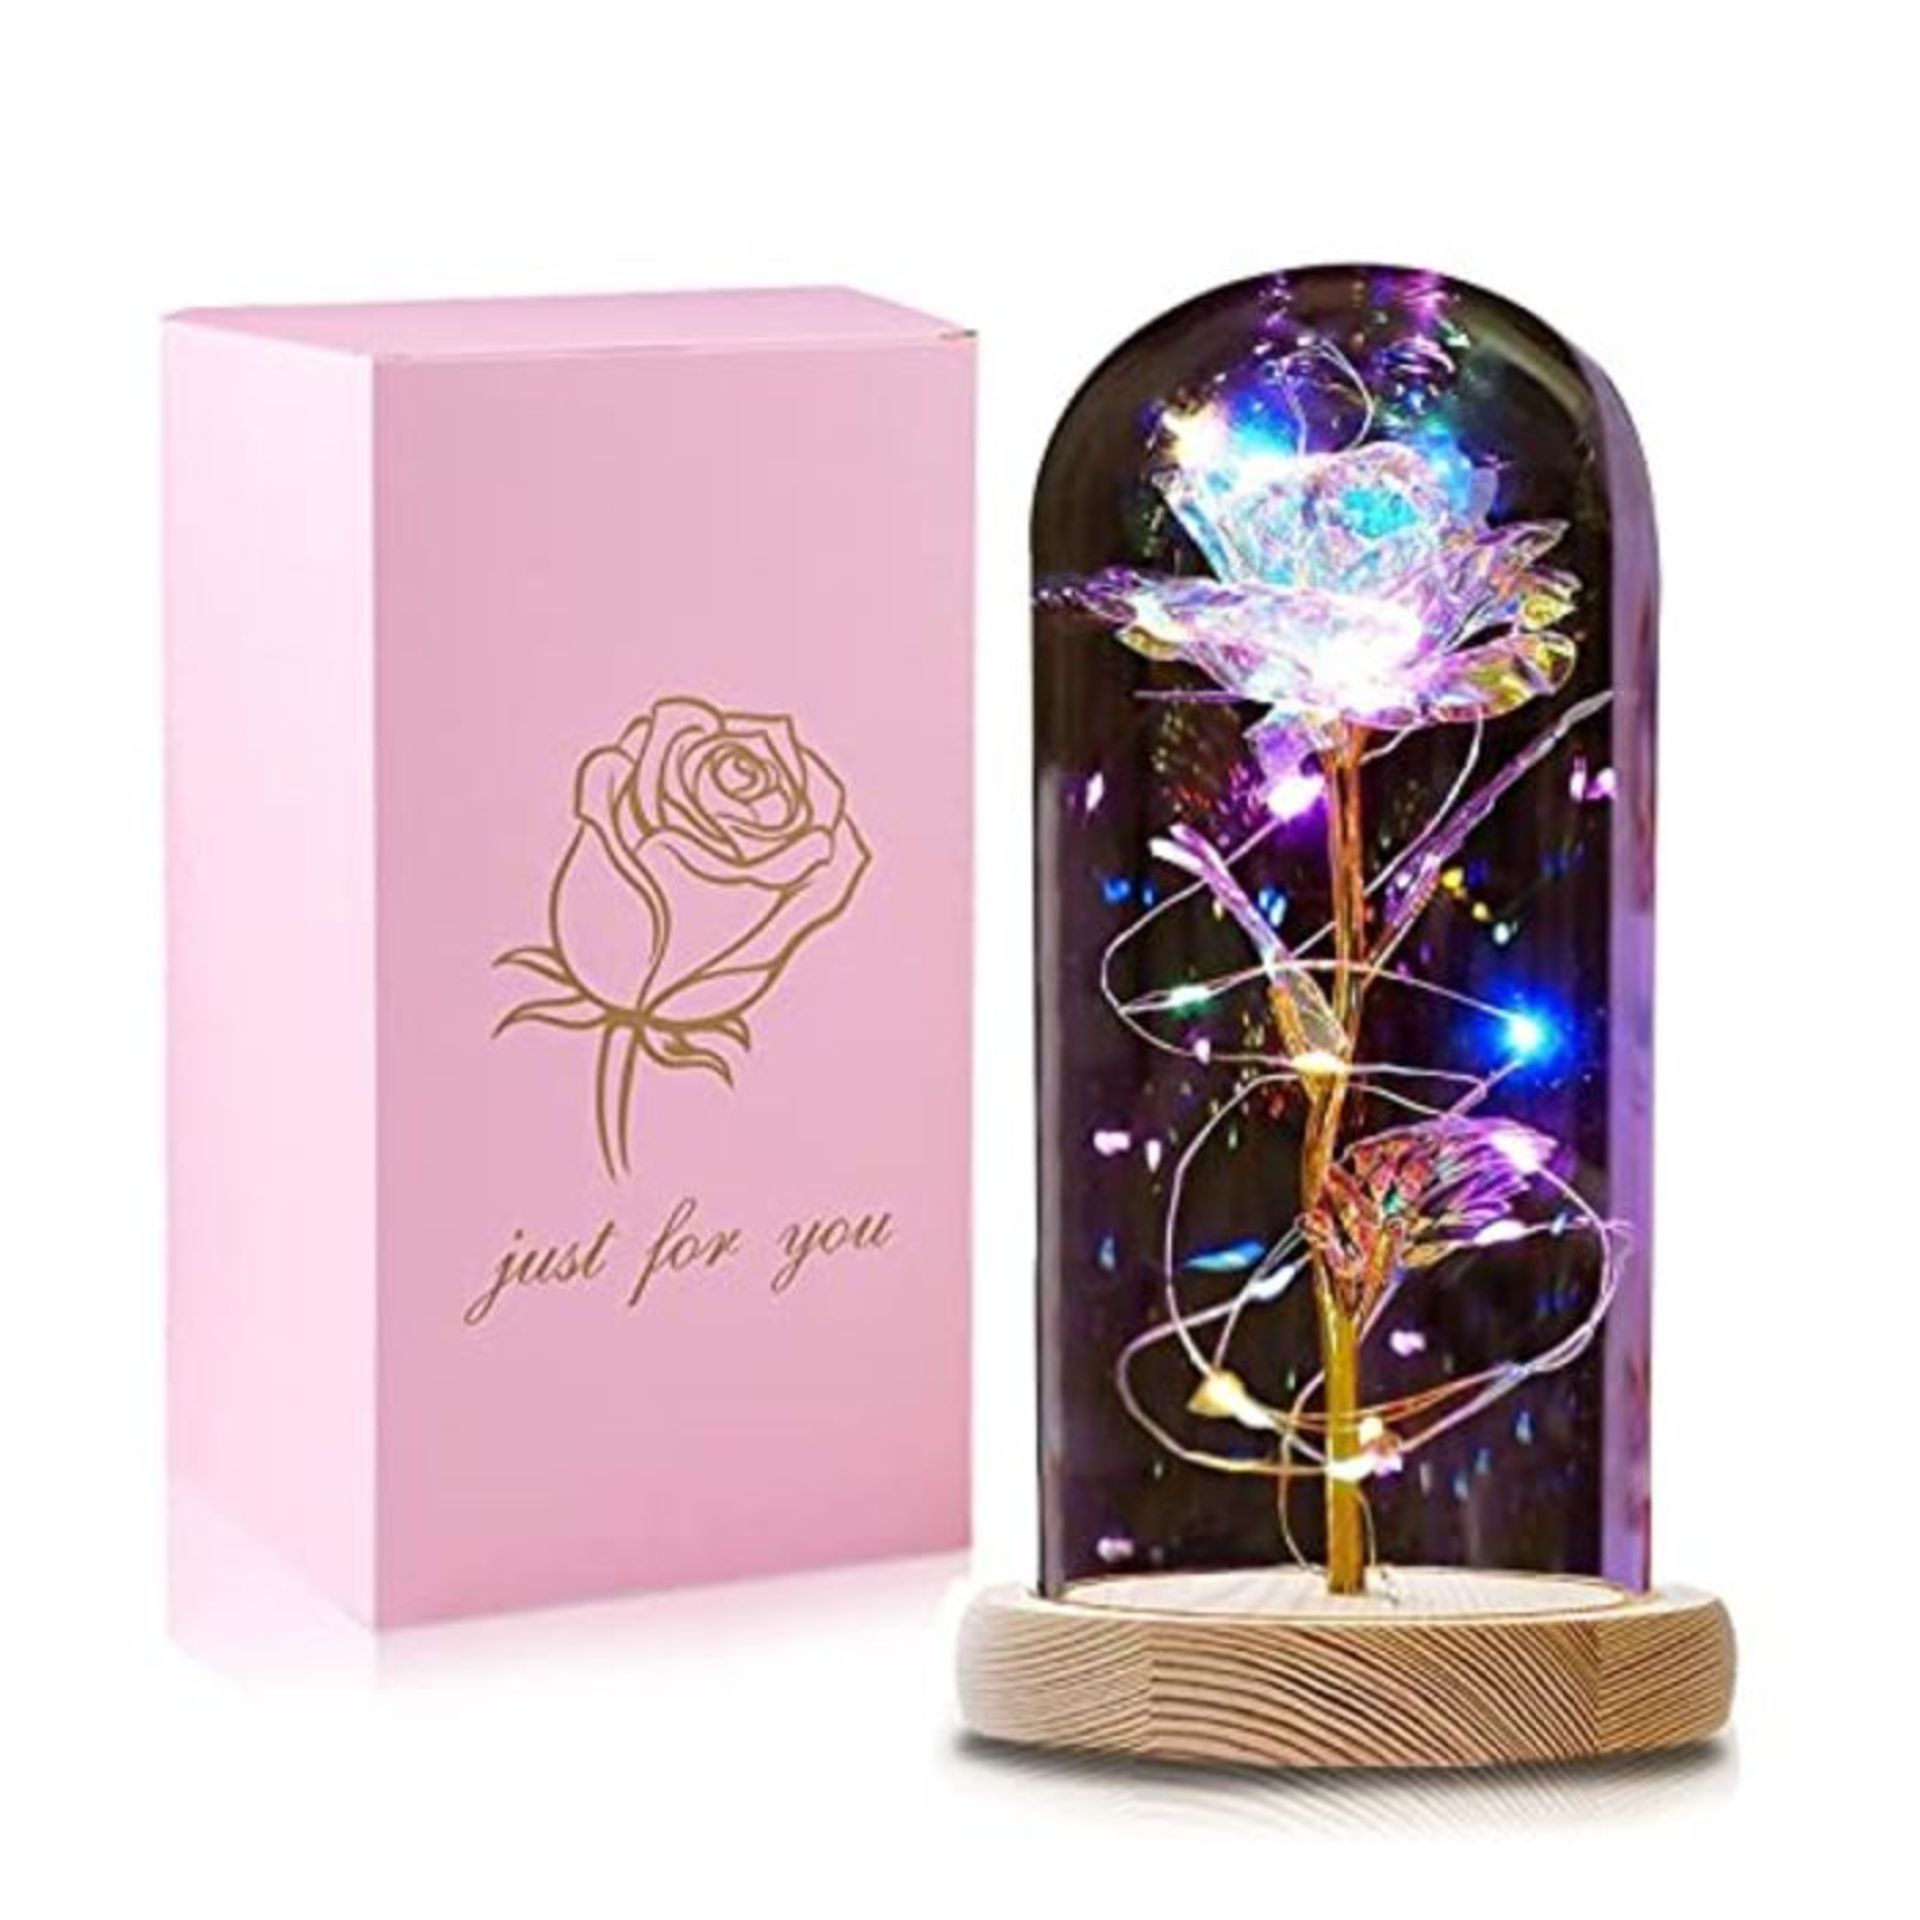 QUNPON Beauty and The Beast Rose Forever Infinity Rose in Glass Dome, Eternal Rainbow